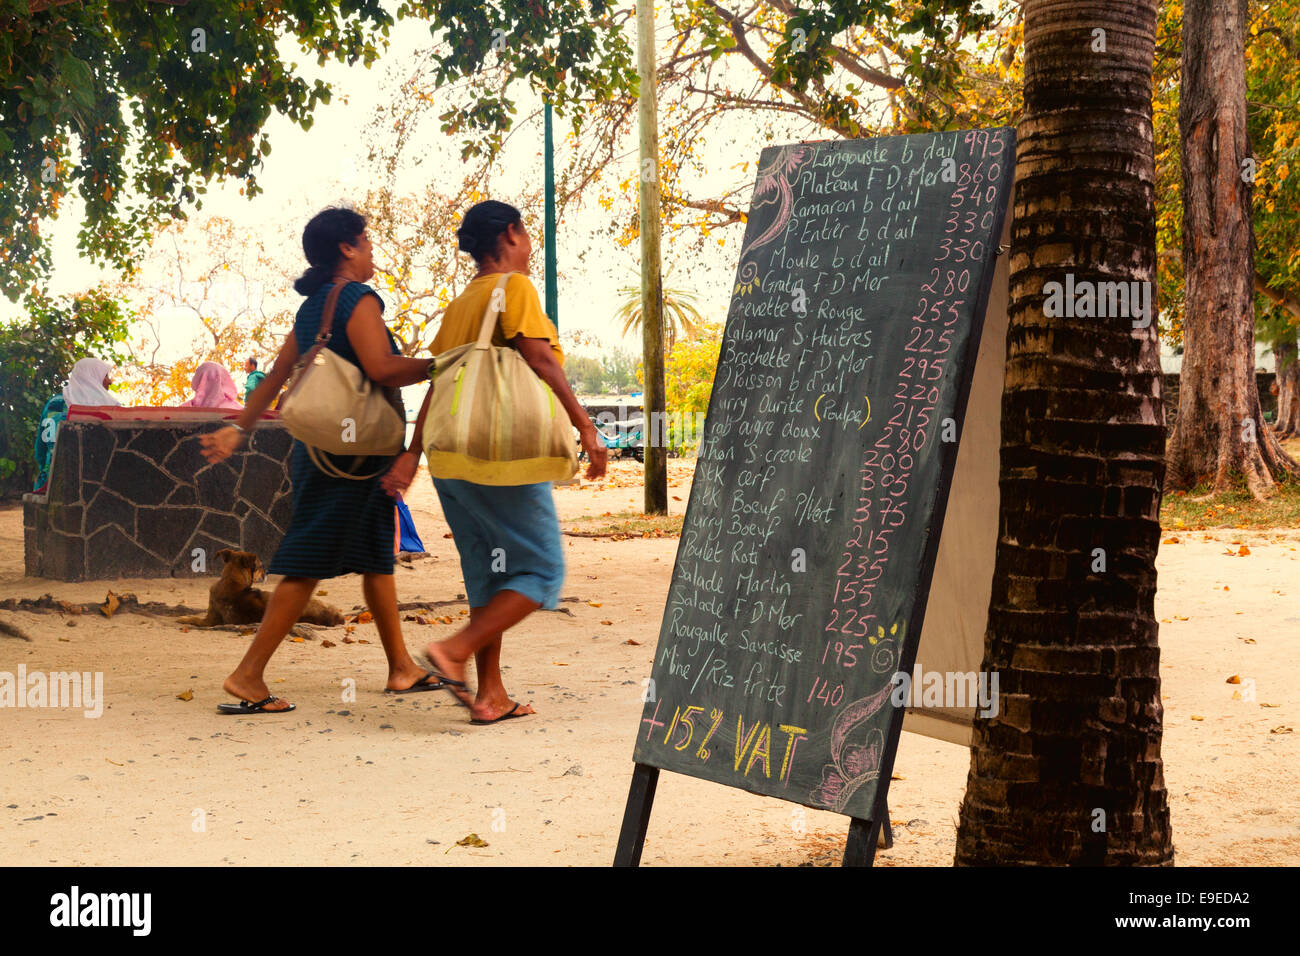 A restaurant menu and local people in the Grand Baie area, northern Mauritius Stock Photo